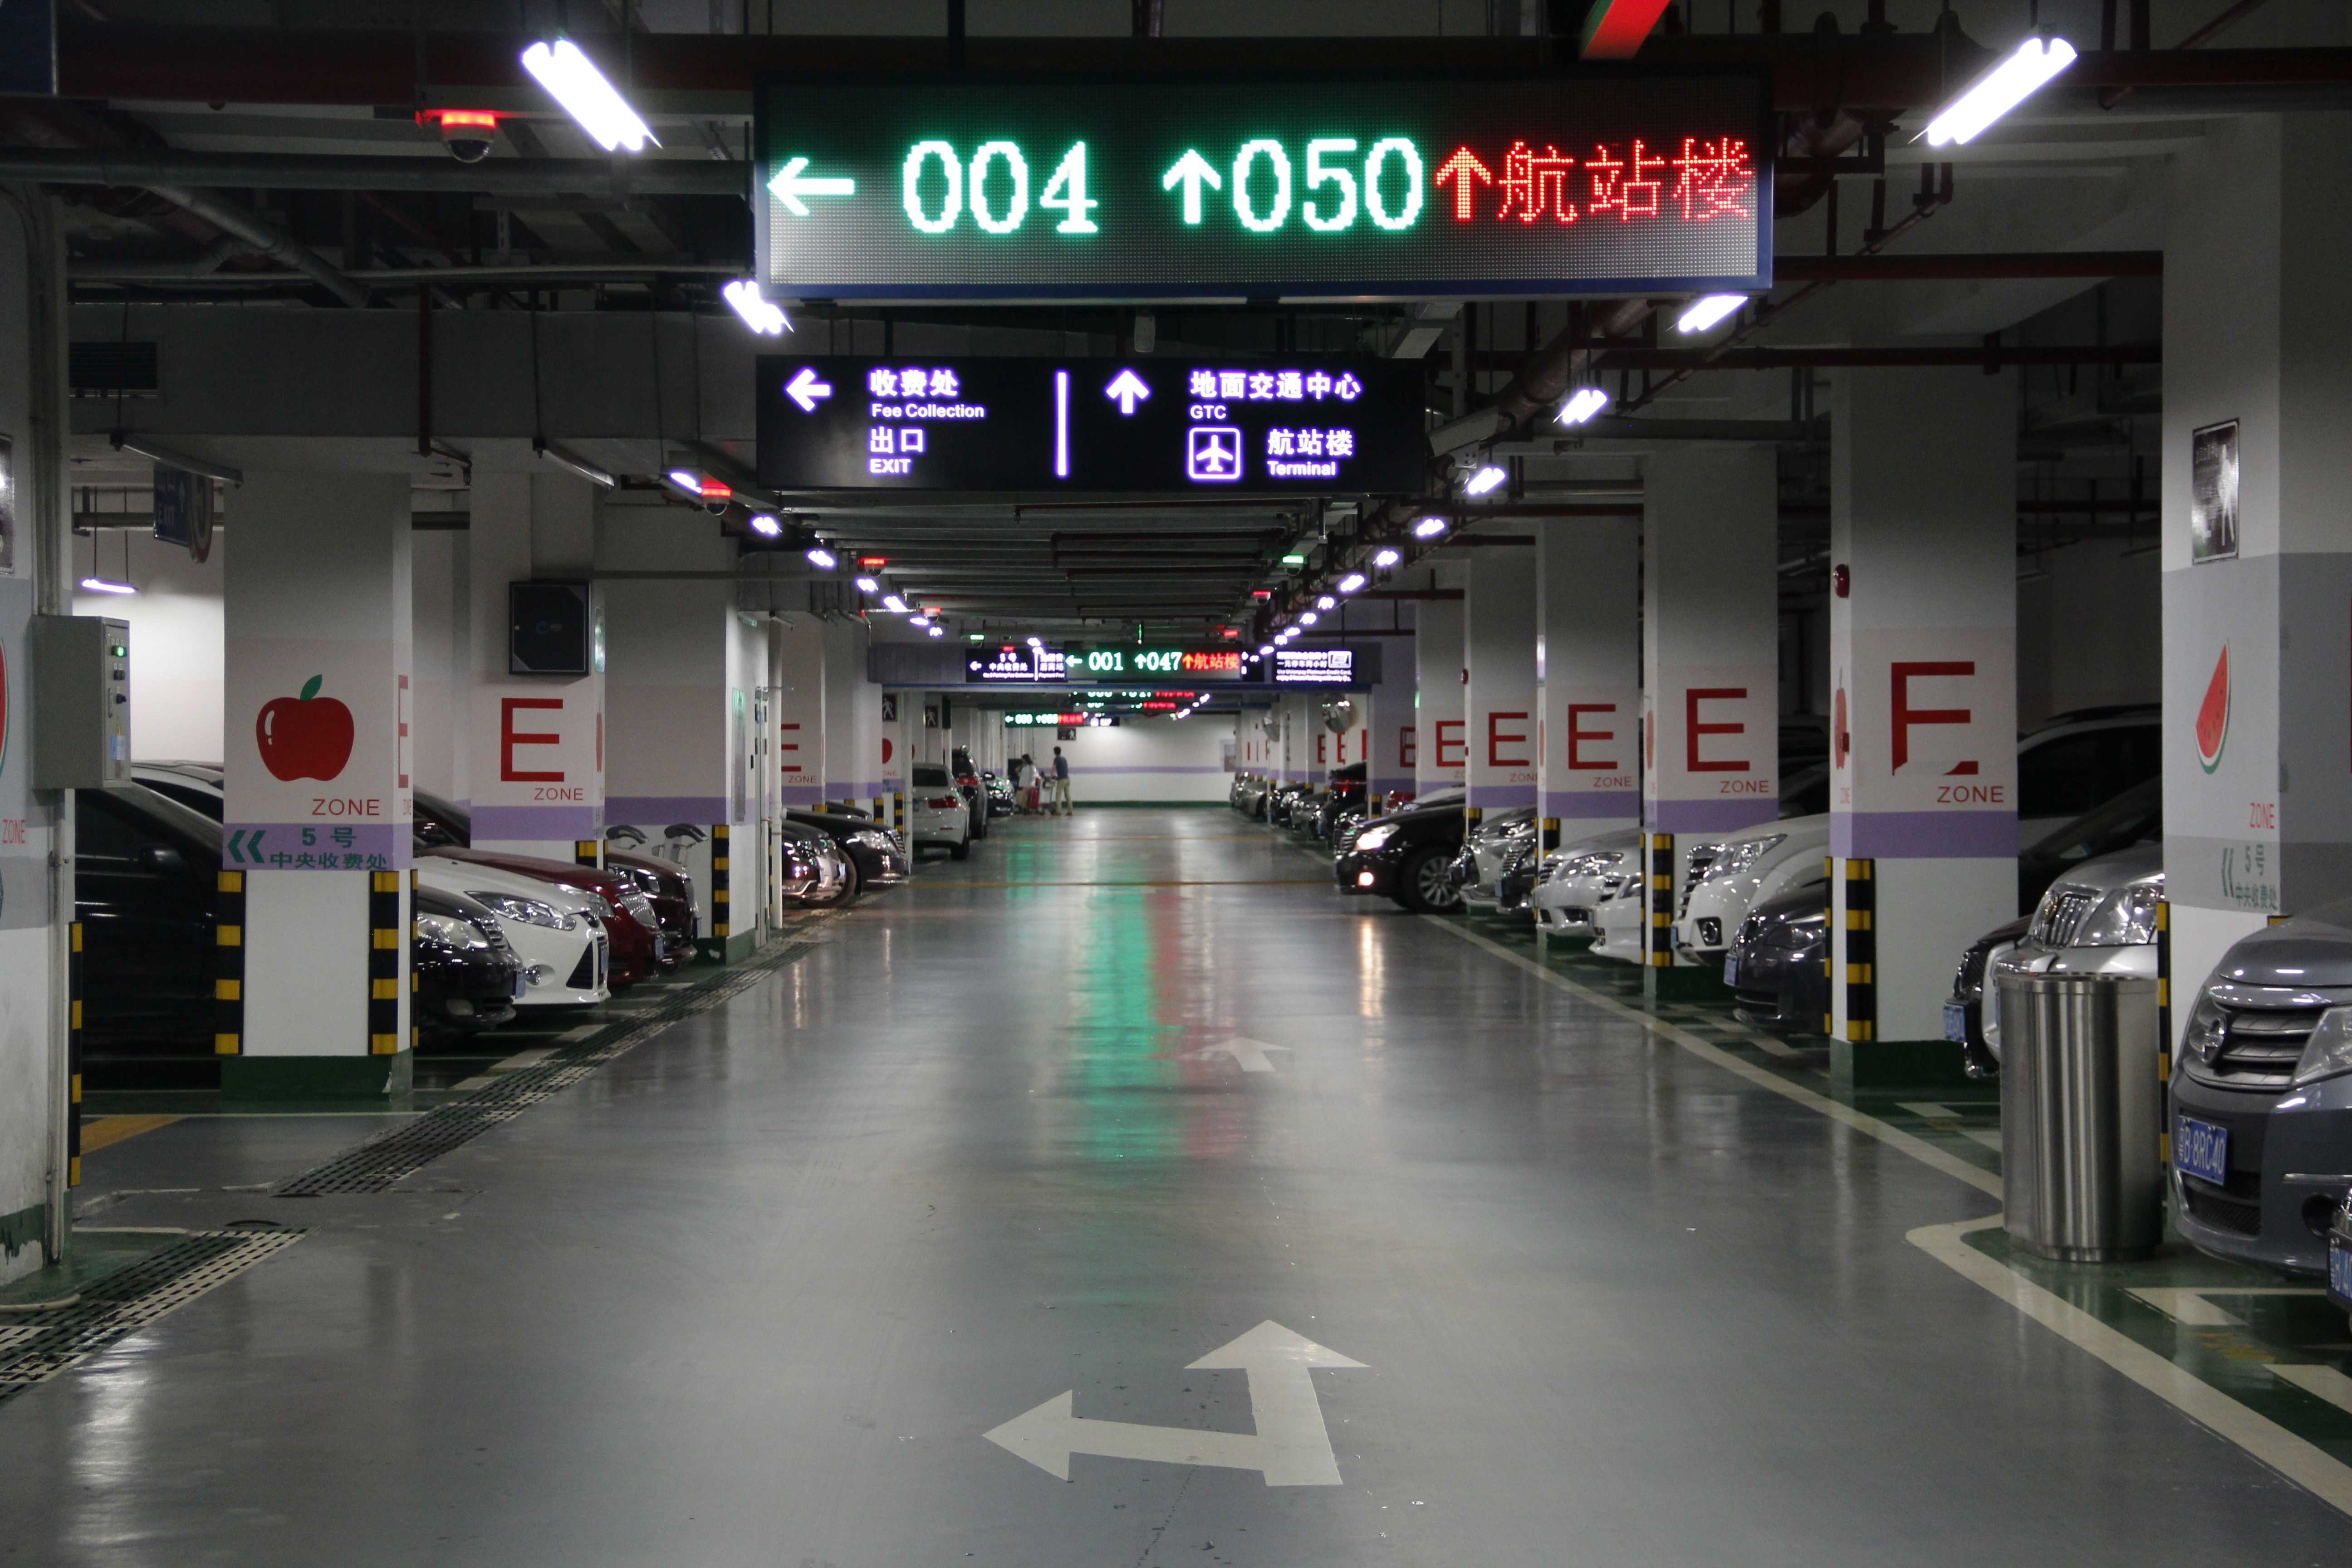 Excelsoo offer parking system more than 10 years. Projects are located in many countries and regions, Russia, Turkey, Georgia, Brazil, Bahrain and so on.